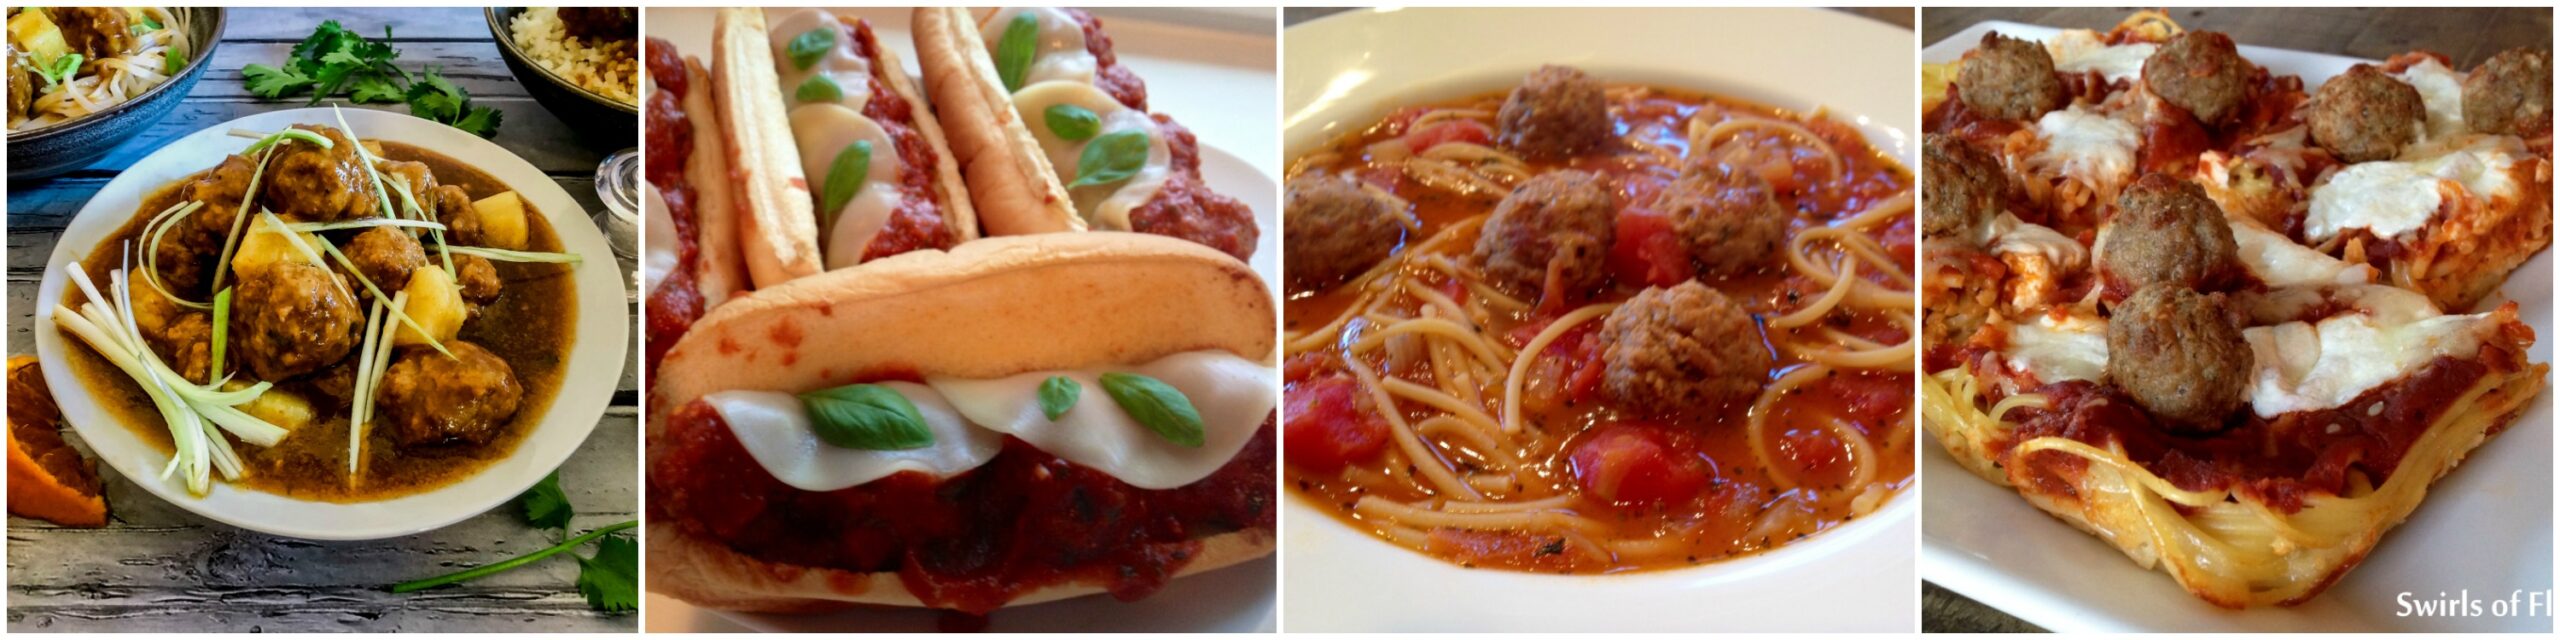 Left to Right: Sweet and Sour Meatballs; Meatball Heros; Spaghetti and Meatball Soup; Spaghetti and Meatball Pizza